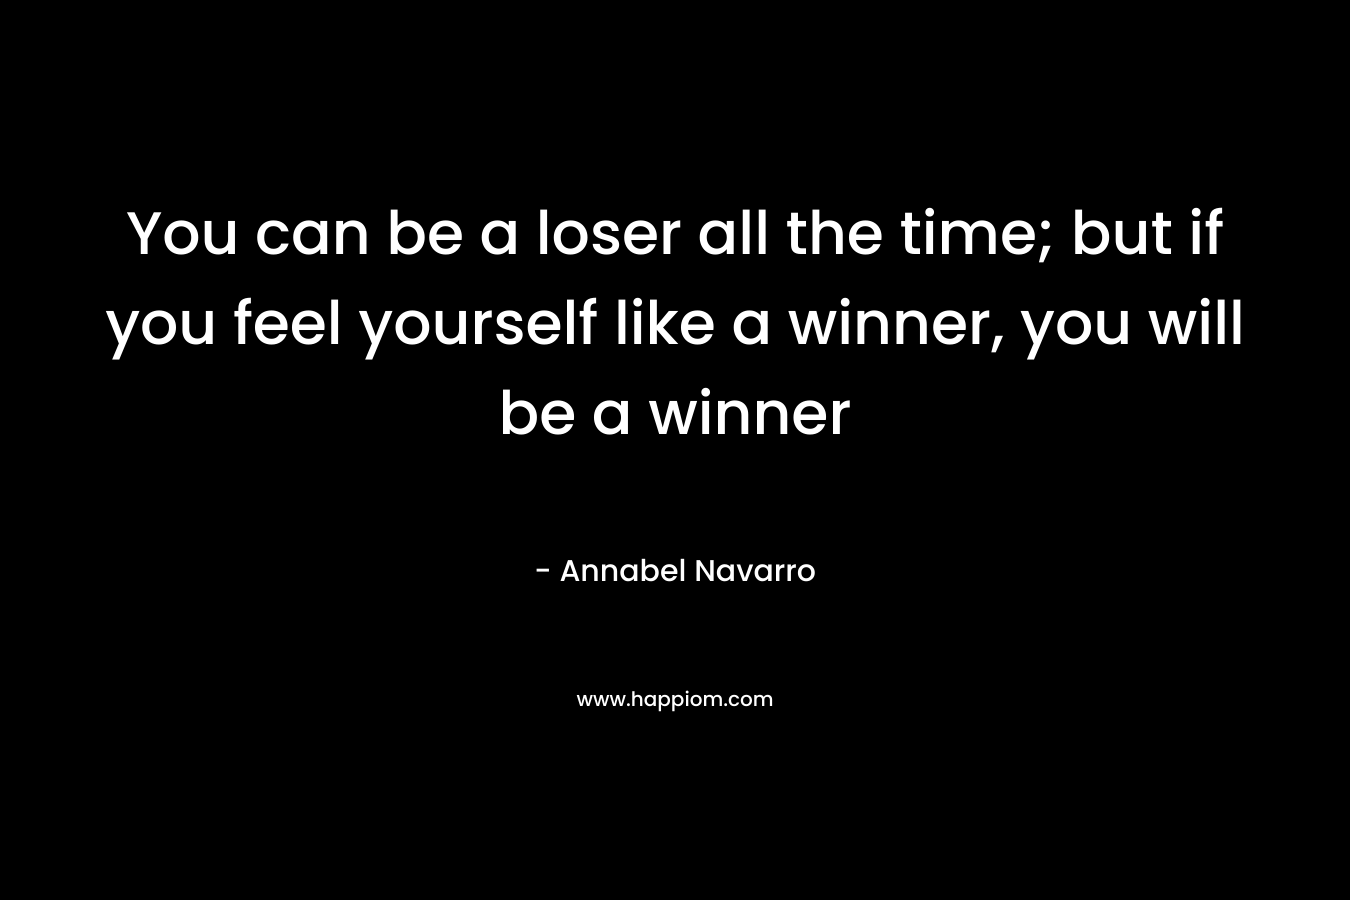 You can be a loser all the time; but if you feel yourself like a winner, you will be a winner